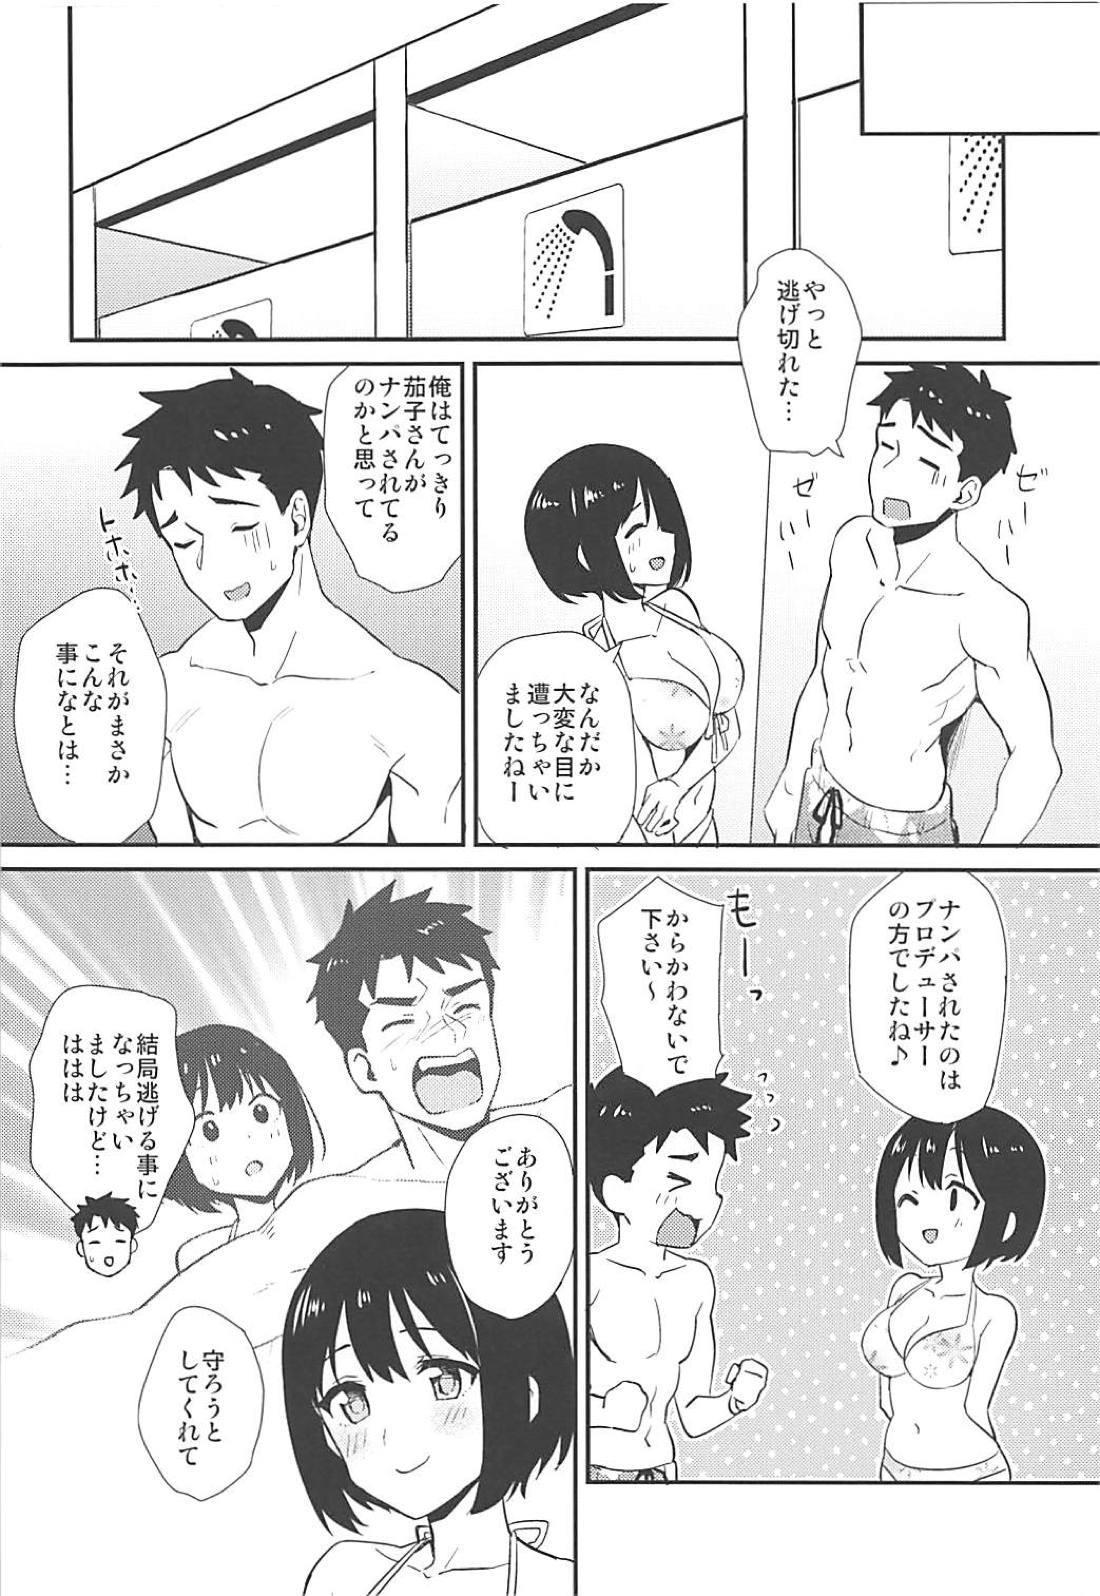 Best Blowjobs Ever Kako-san to Minami no Shima de Rendezvous - The idolmaster Lover - Page 7